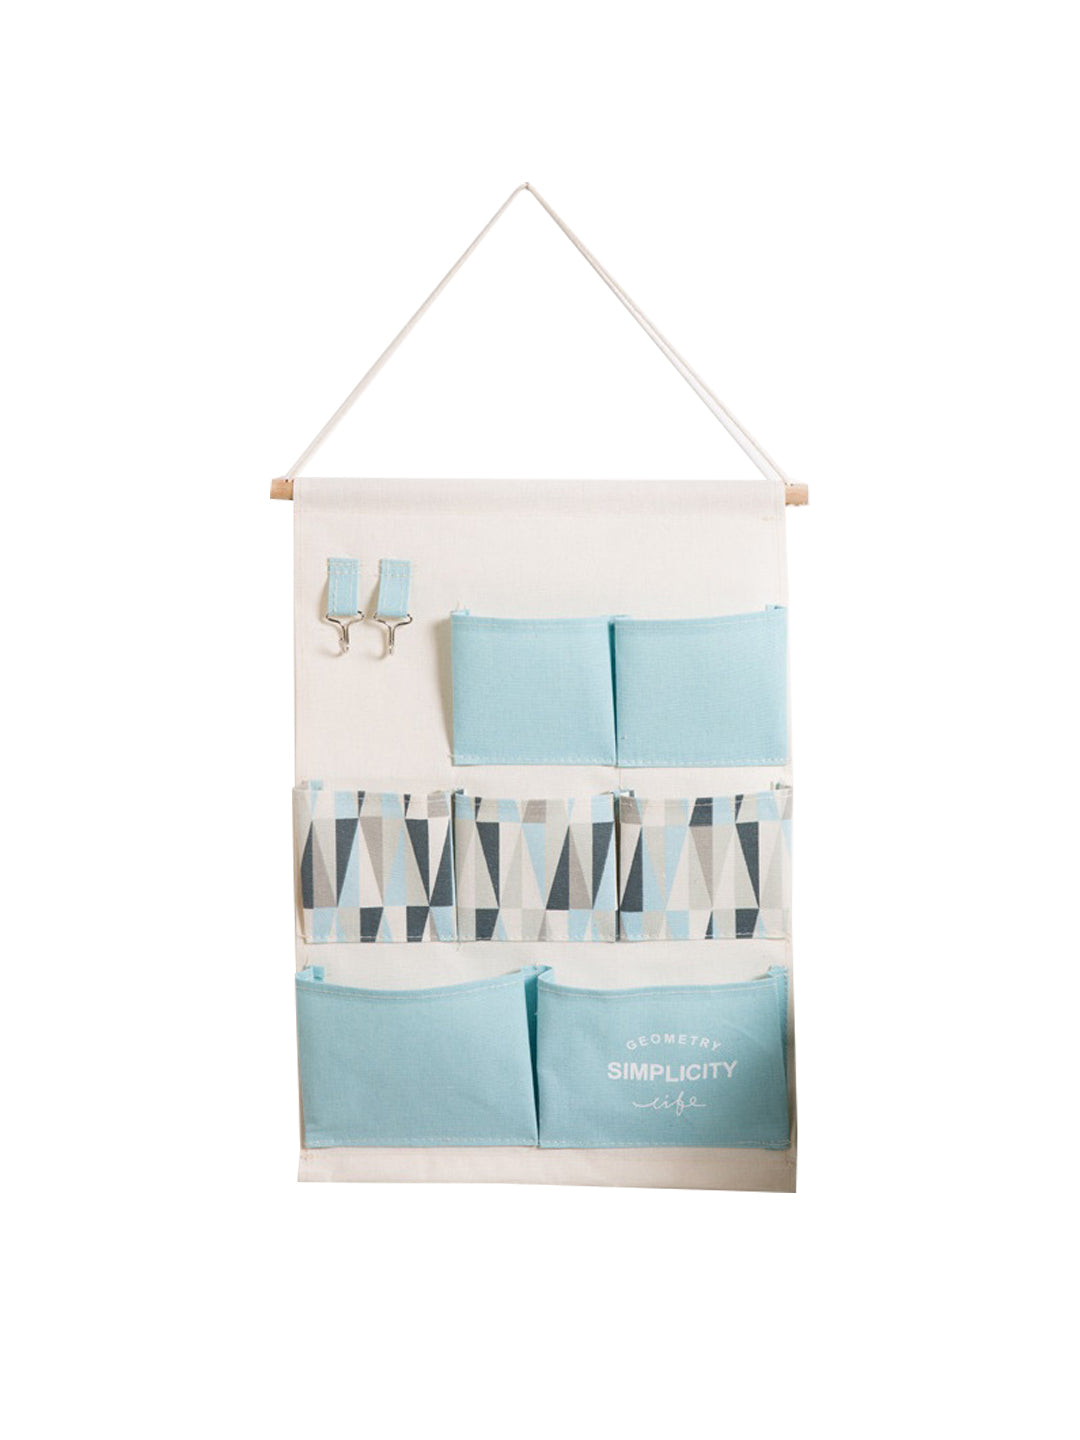 VON CASA Wall Hanging Storage Bag With 7 Pockets And Key Hook - Blue